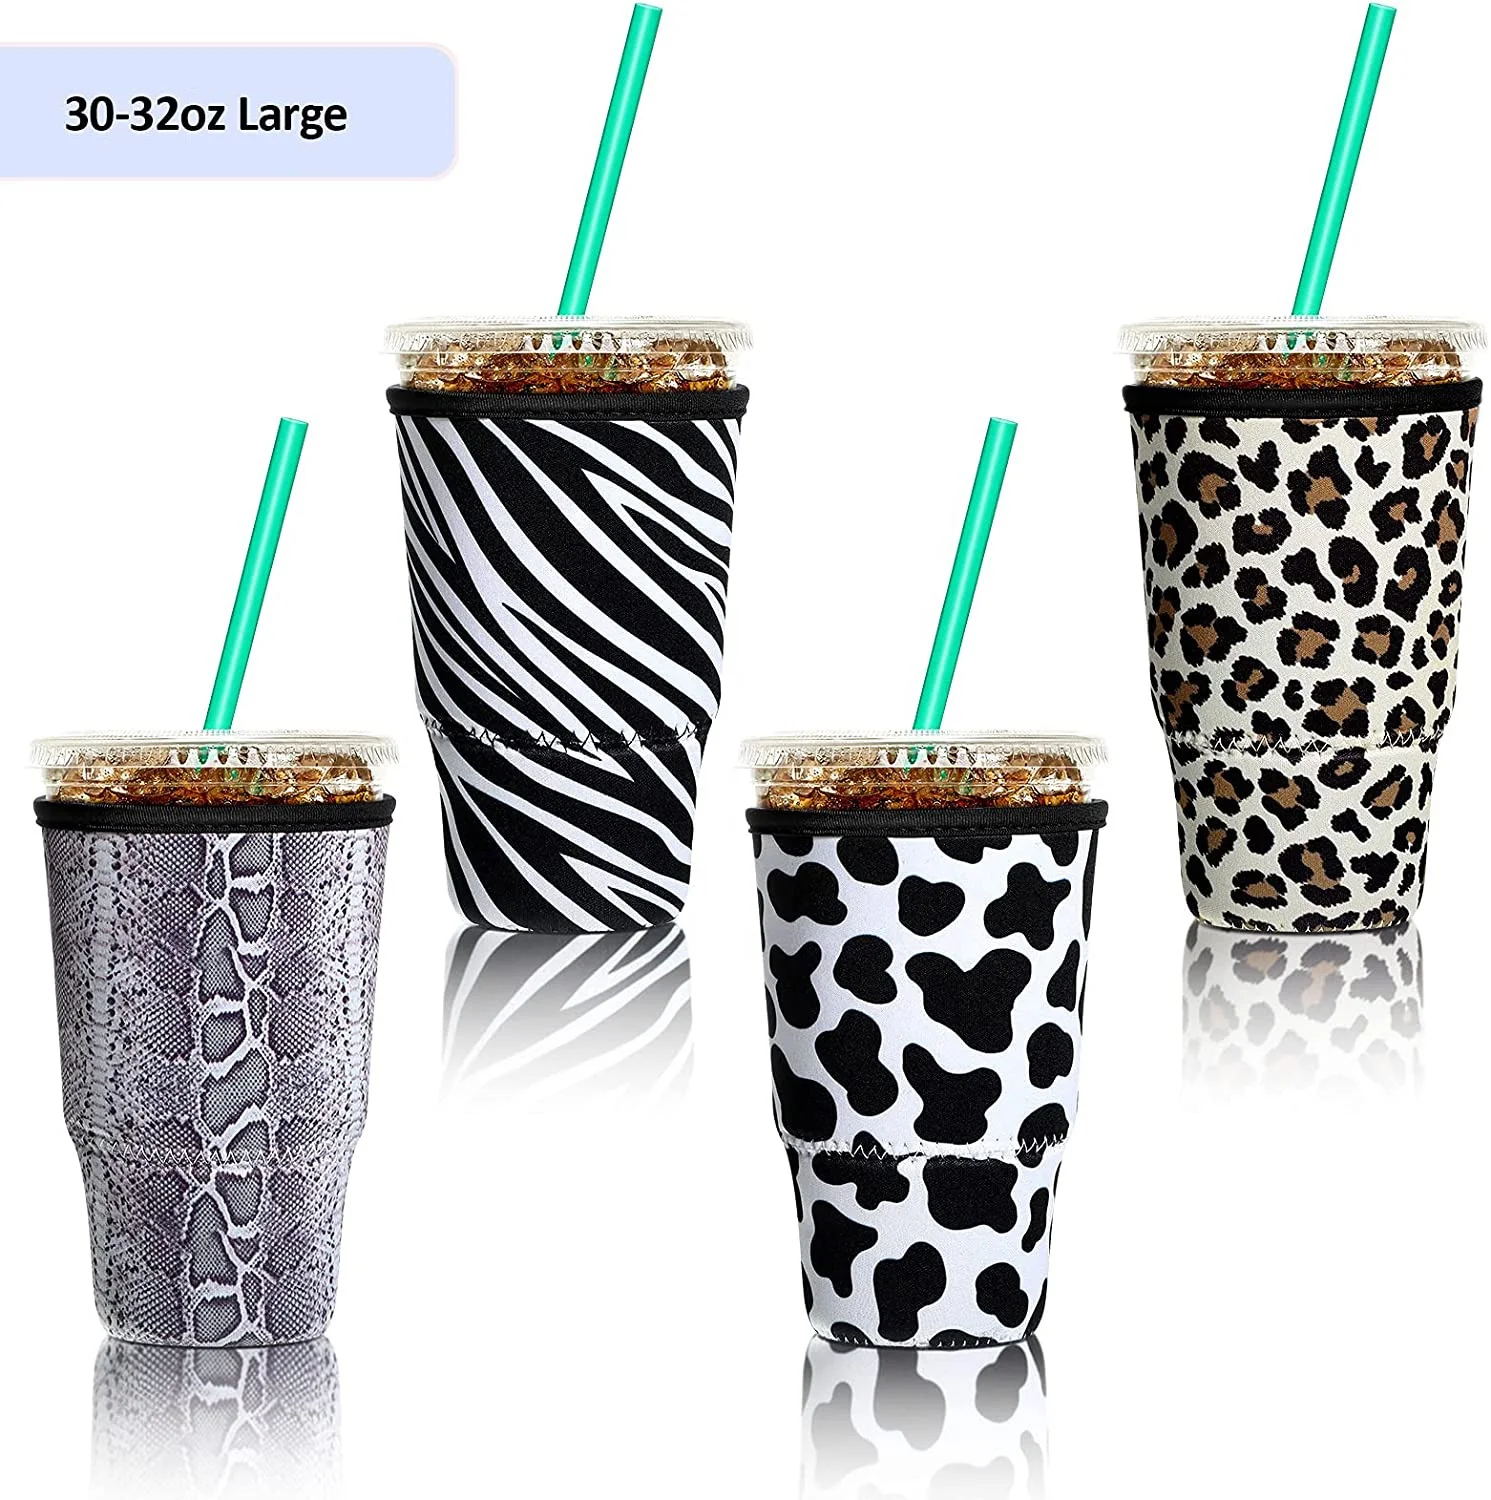 

Summer Cold Drink Coffee Holder Neoprene Insulator Large Size 30-32 OZ Custom High Quality Ice Coffee Sleeves, Customized color